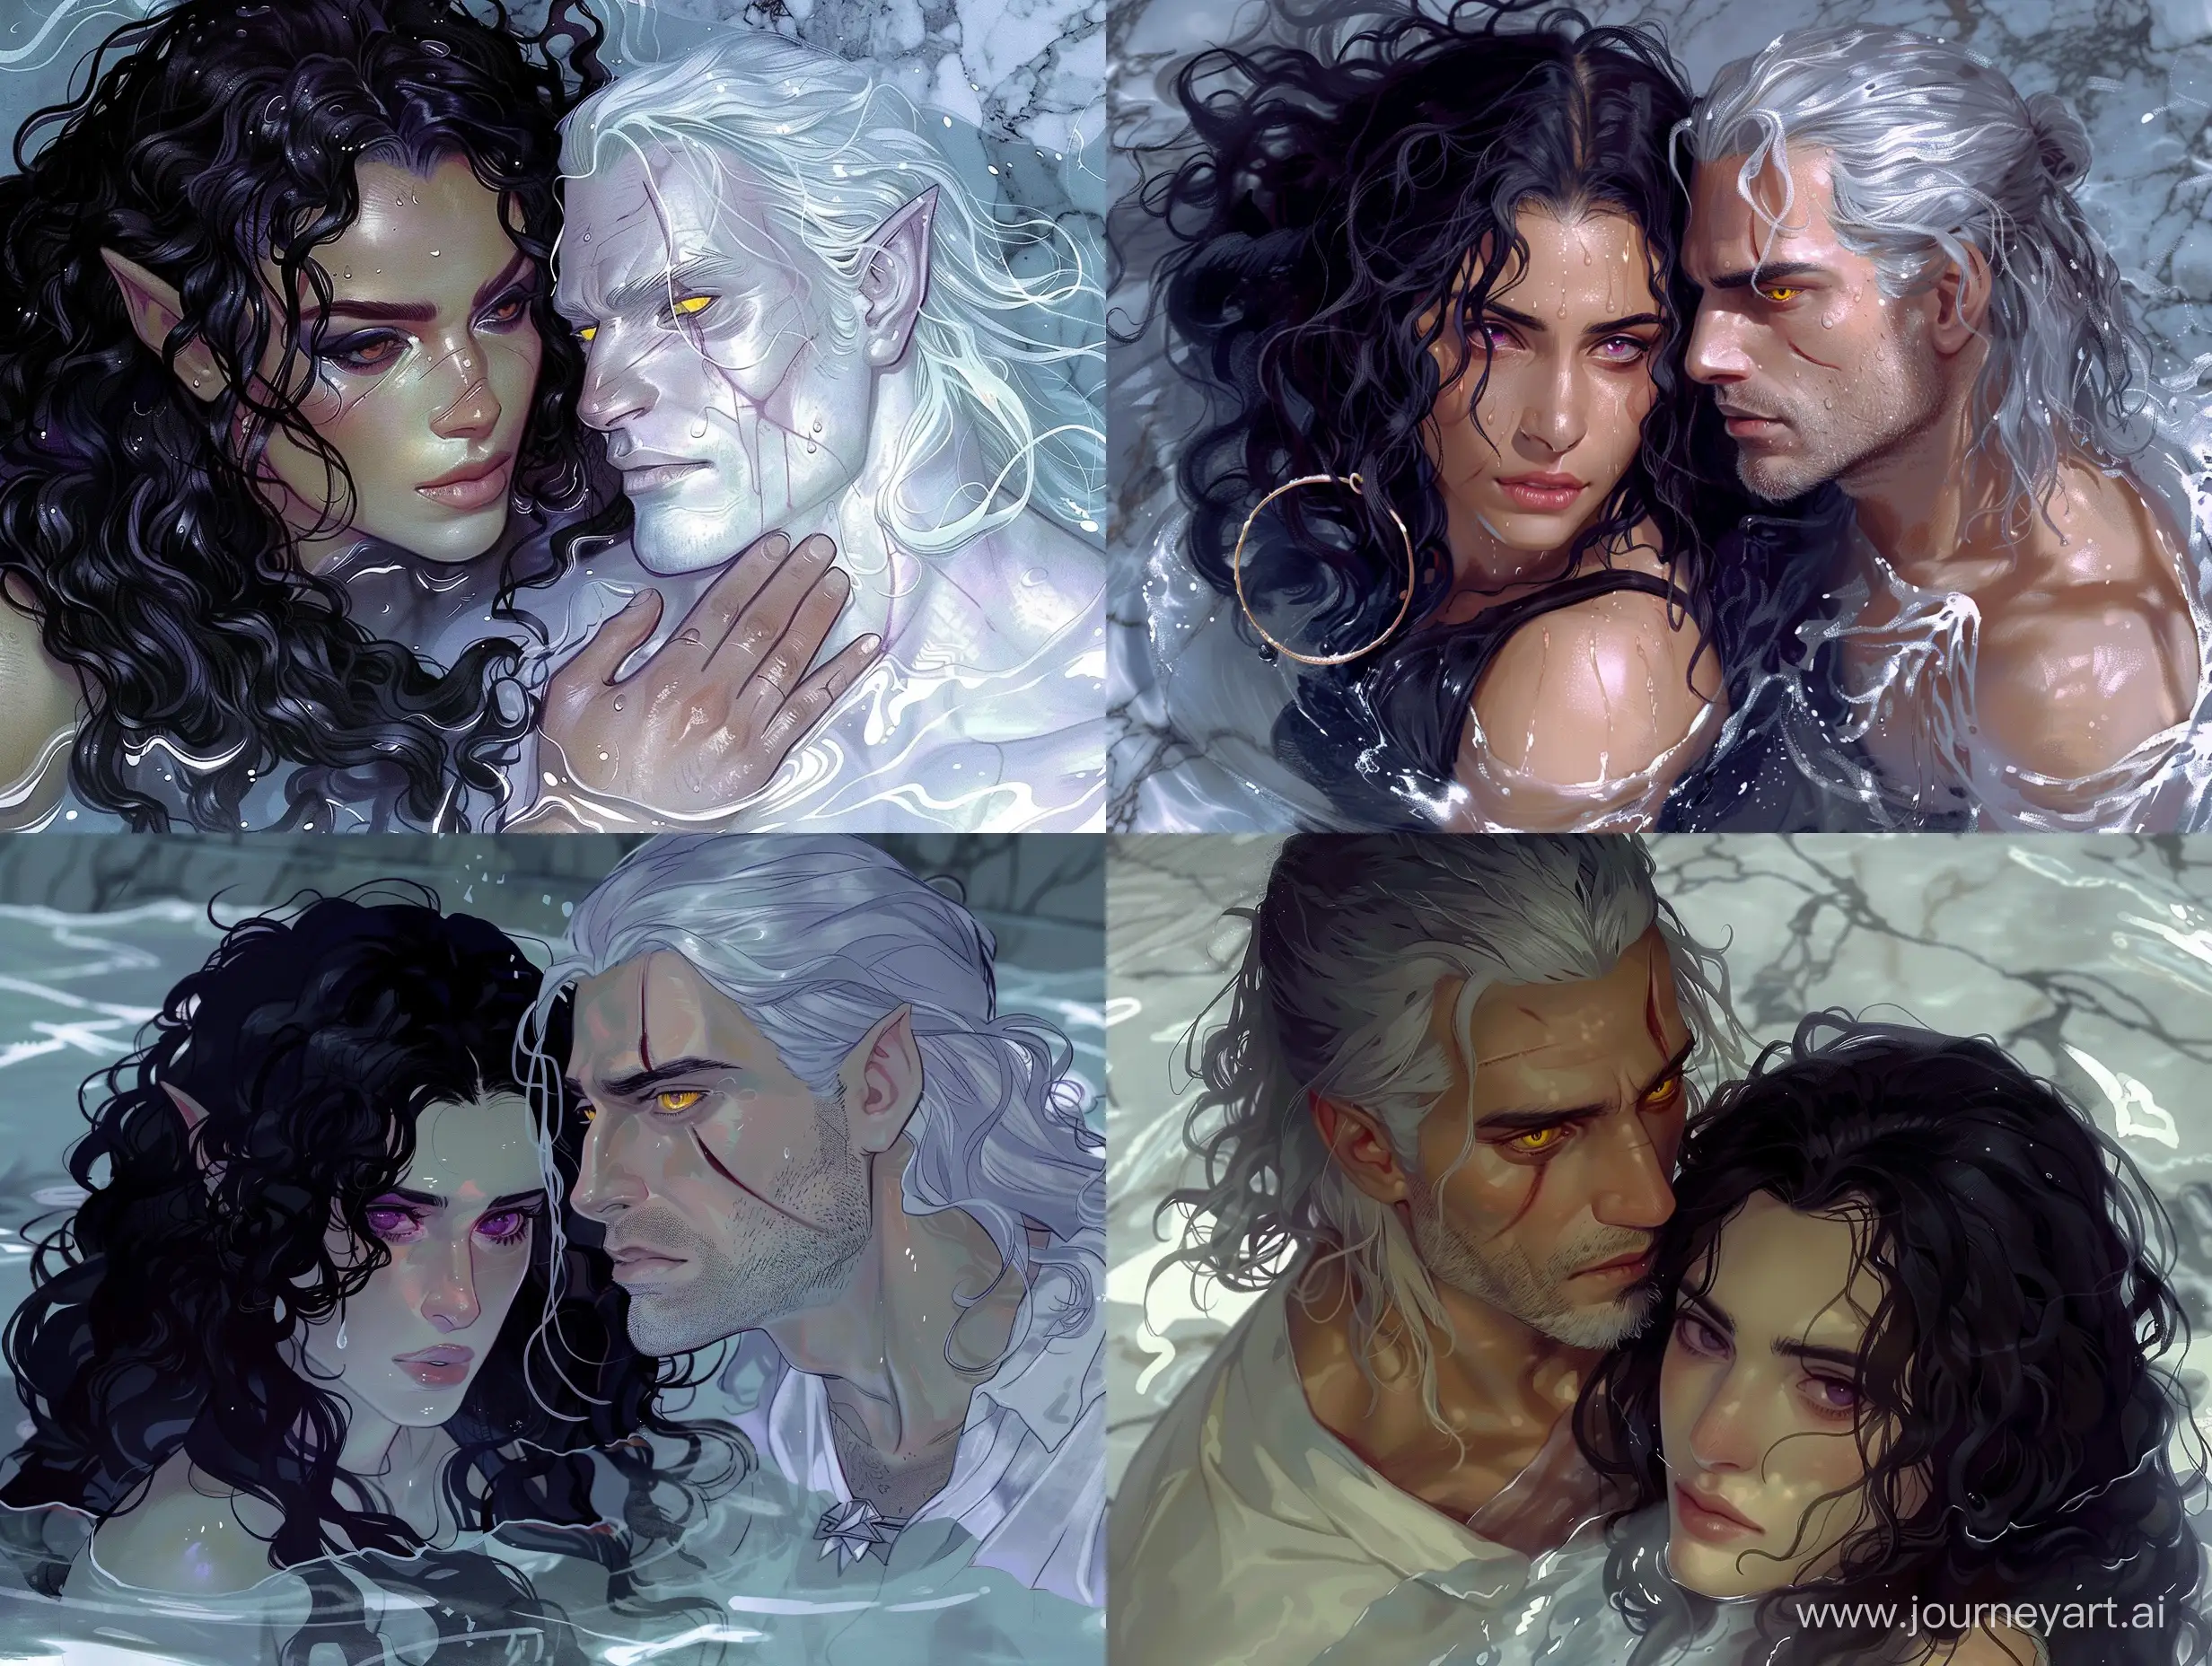 Geralt and Yennefer together in a marble pool. Yennefer's hair is dark black, curly, wet and slick. Her eyes are deep violet. Geralt is lean and his eyes are yellow and cat like. His hair is milky white. They are looking lovingly at each other's faces. Both of them are waist deep in the water.  sumowtawgha